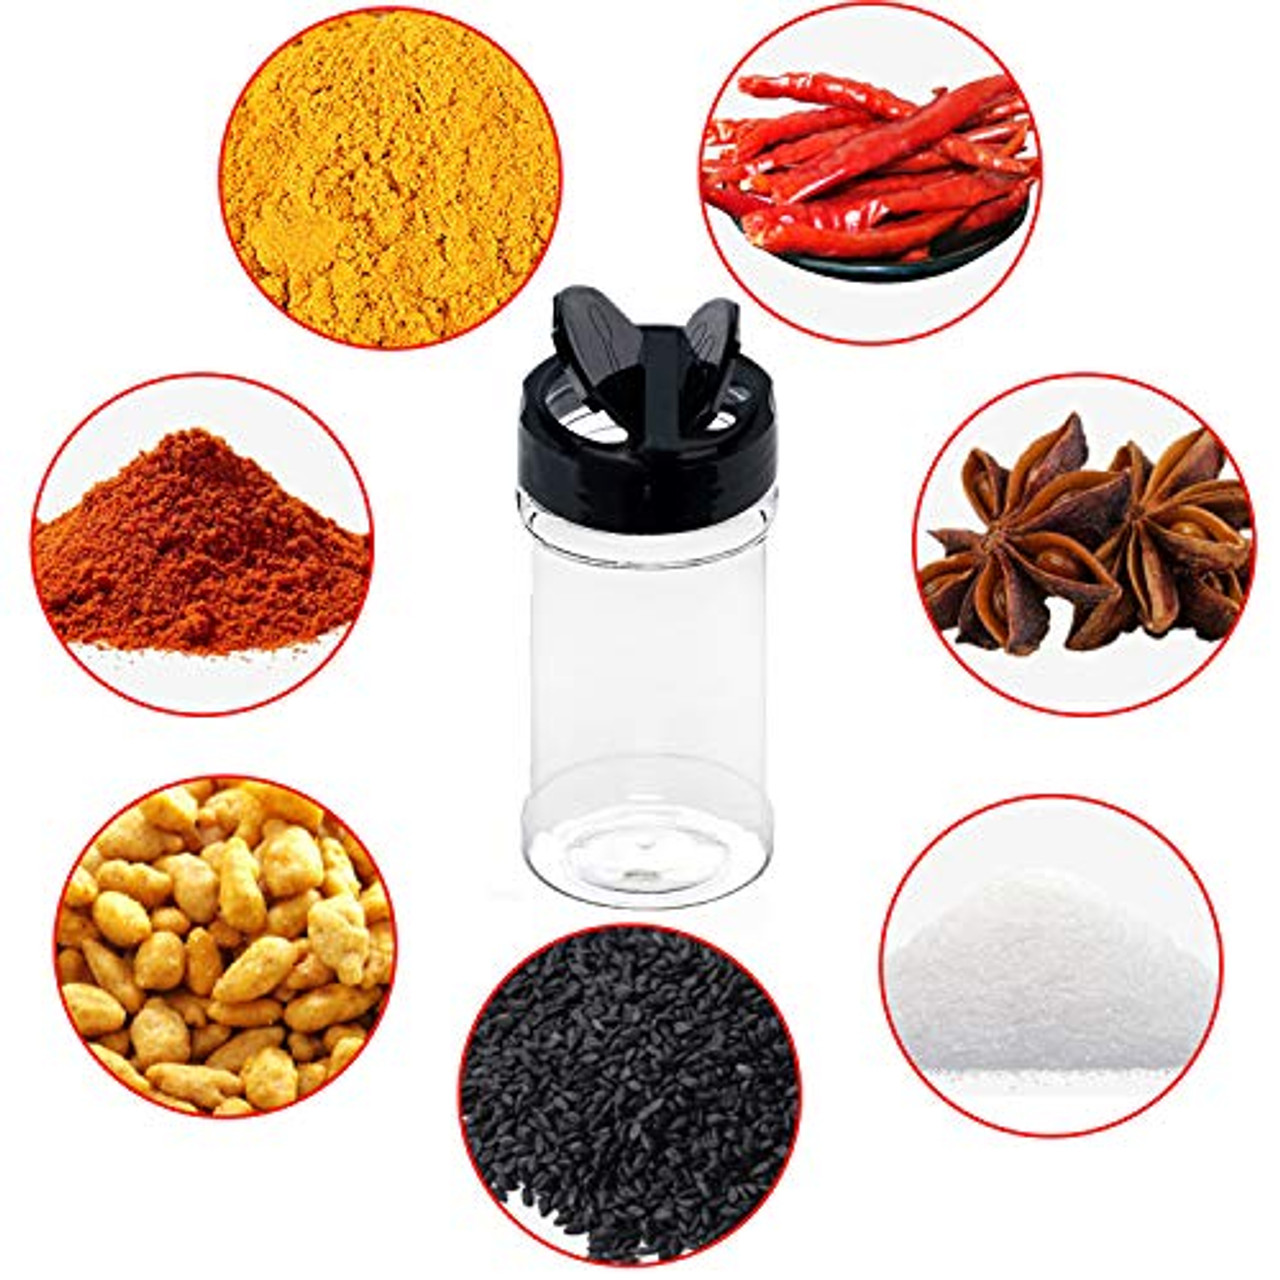 Set of 12Pcs Empty Plastic Spice Jars with Black Cap,Spice Containers for  Storing BBQ Seasoning